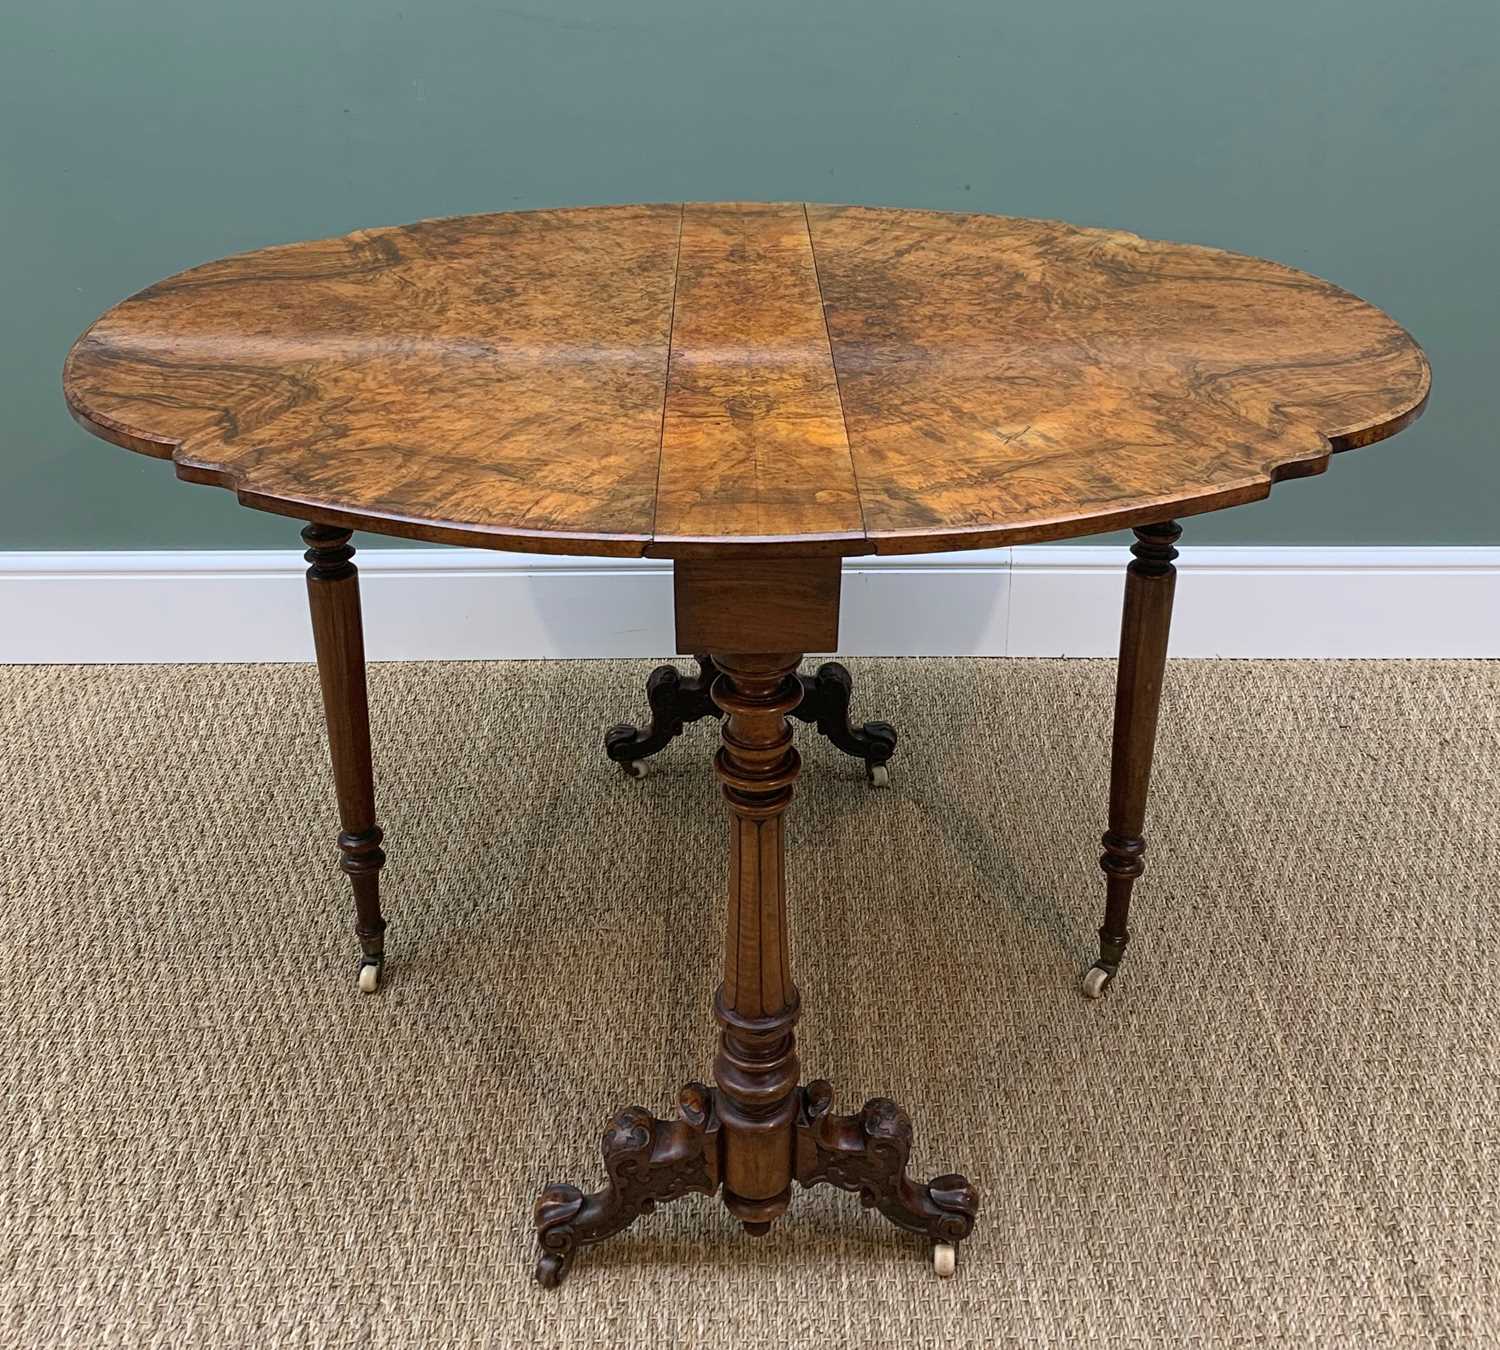 MID VICTORIAN BURR-WALNUT SUTHERLAND TABLE, shaped top over column suppports with blind fret - Image 2 of 6